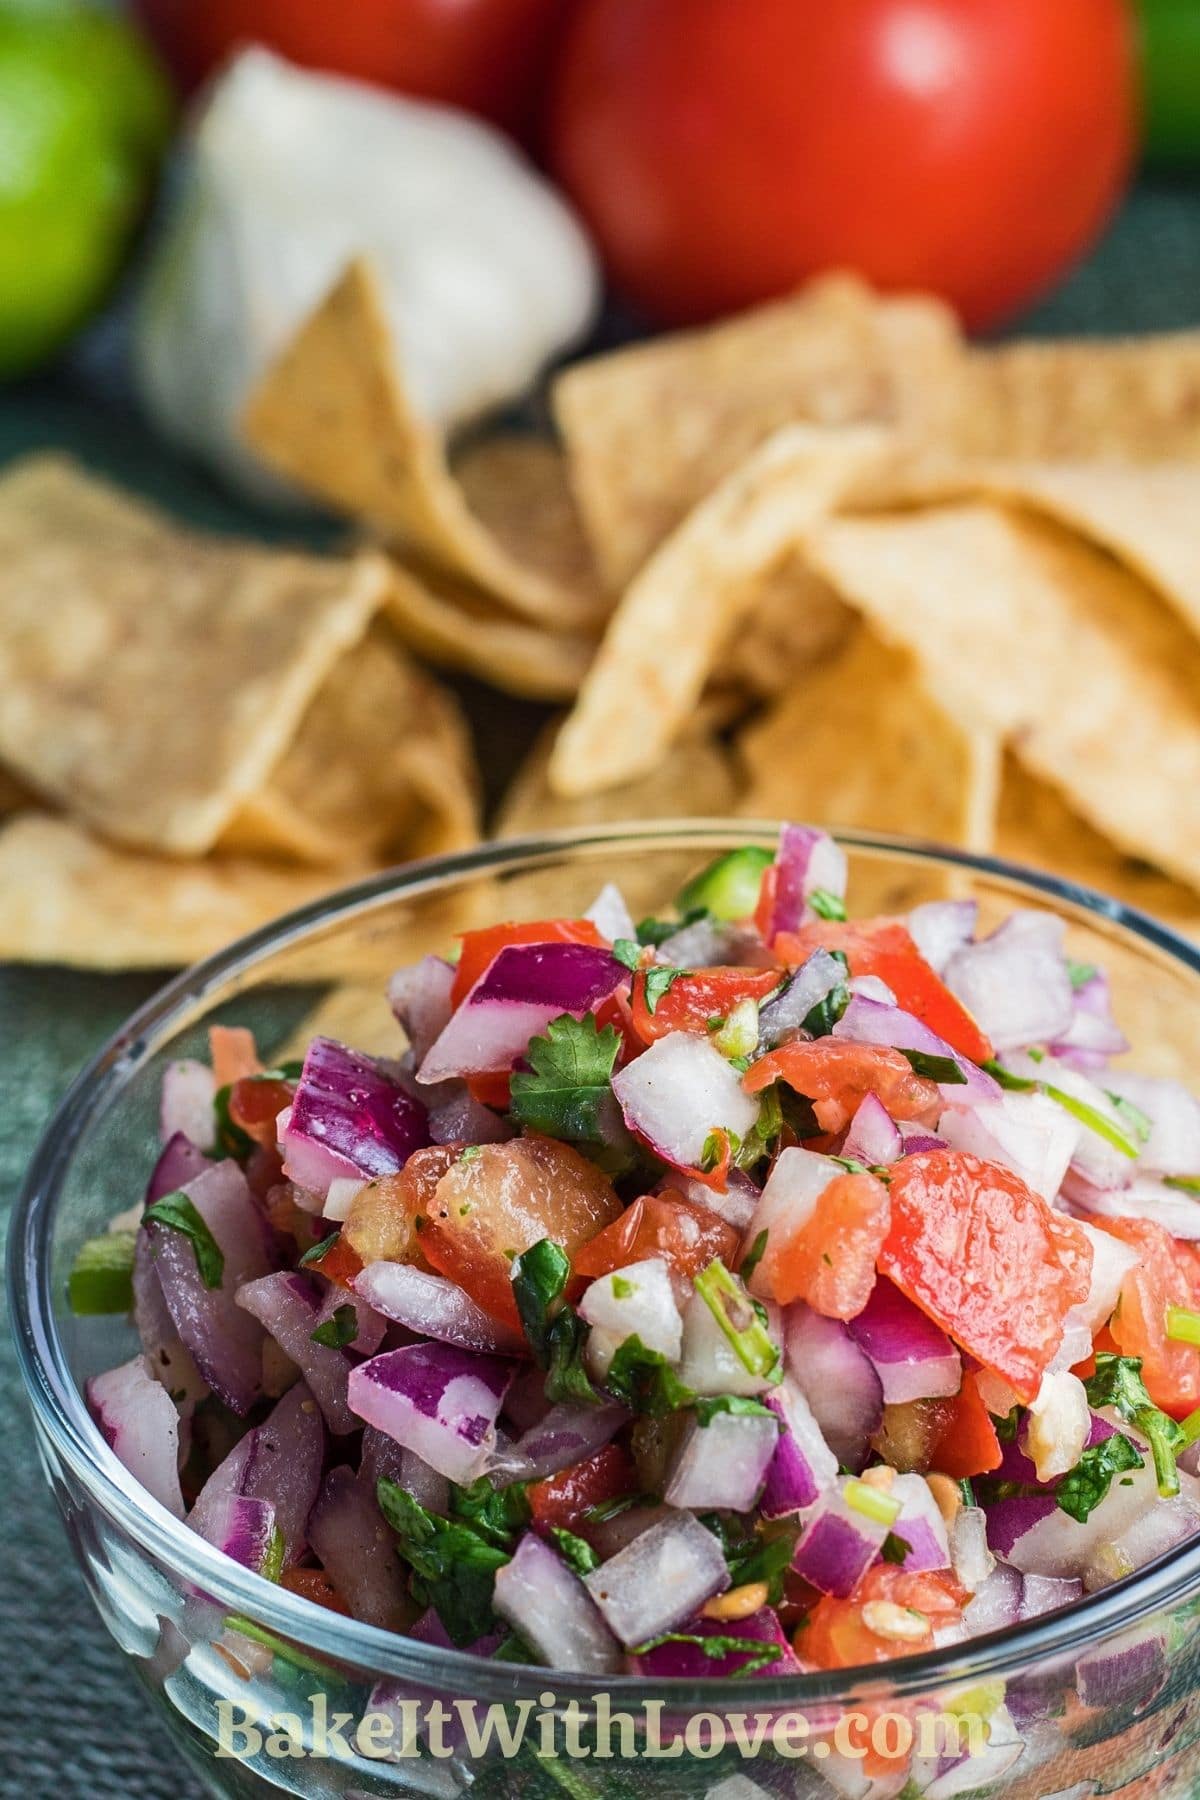 Pico de gallo served in clear bowl with chips and fresh ingredients.